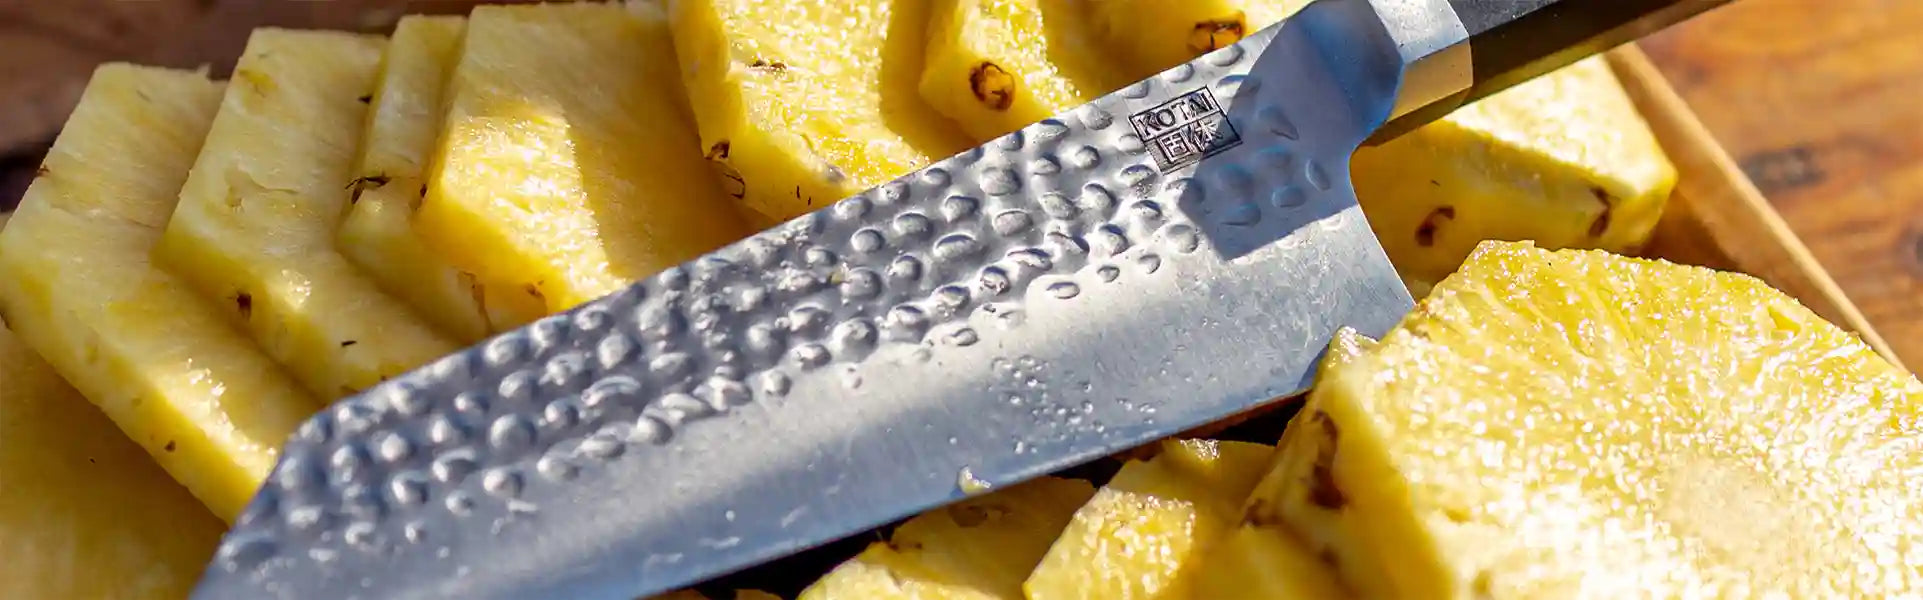 How to Sharpen a Kitchen Knife Without a Knife Sharpener